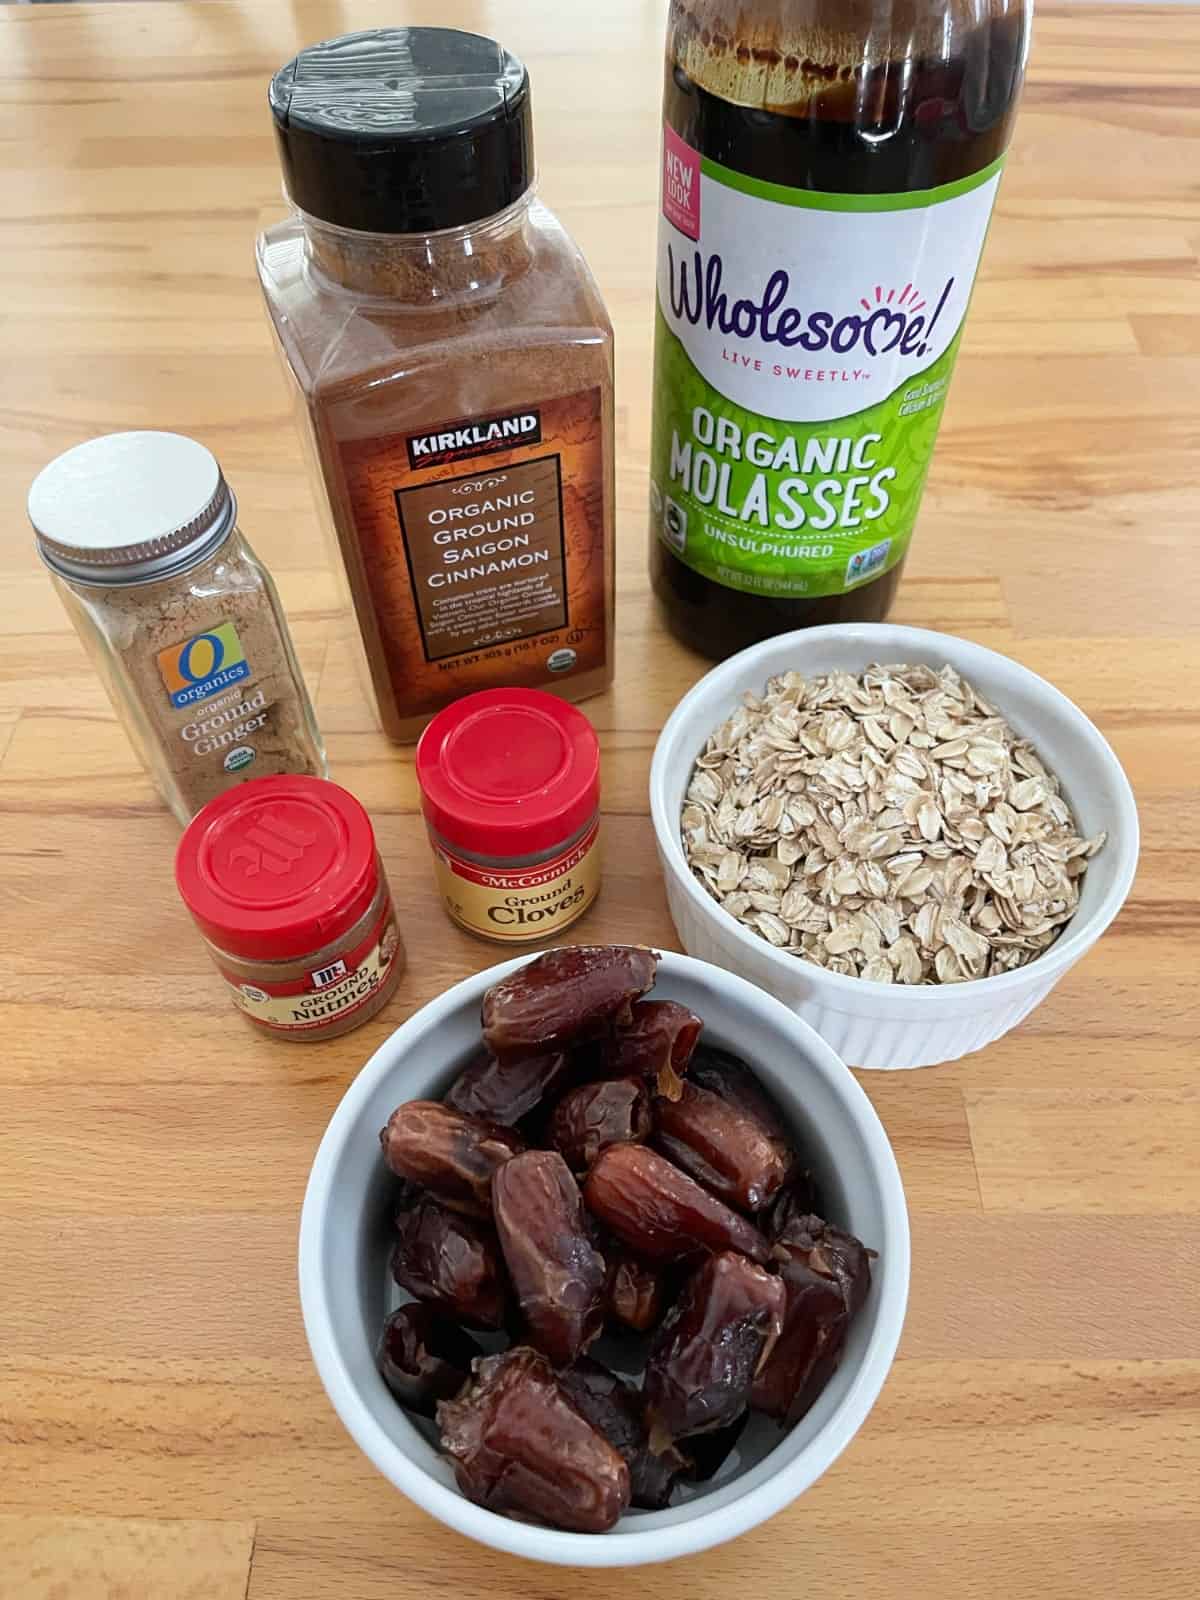 Ingredients for making gingerbread truffles including molasses, oats, dates, cinnamon, ginger, cloves and nutmeg.